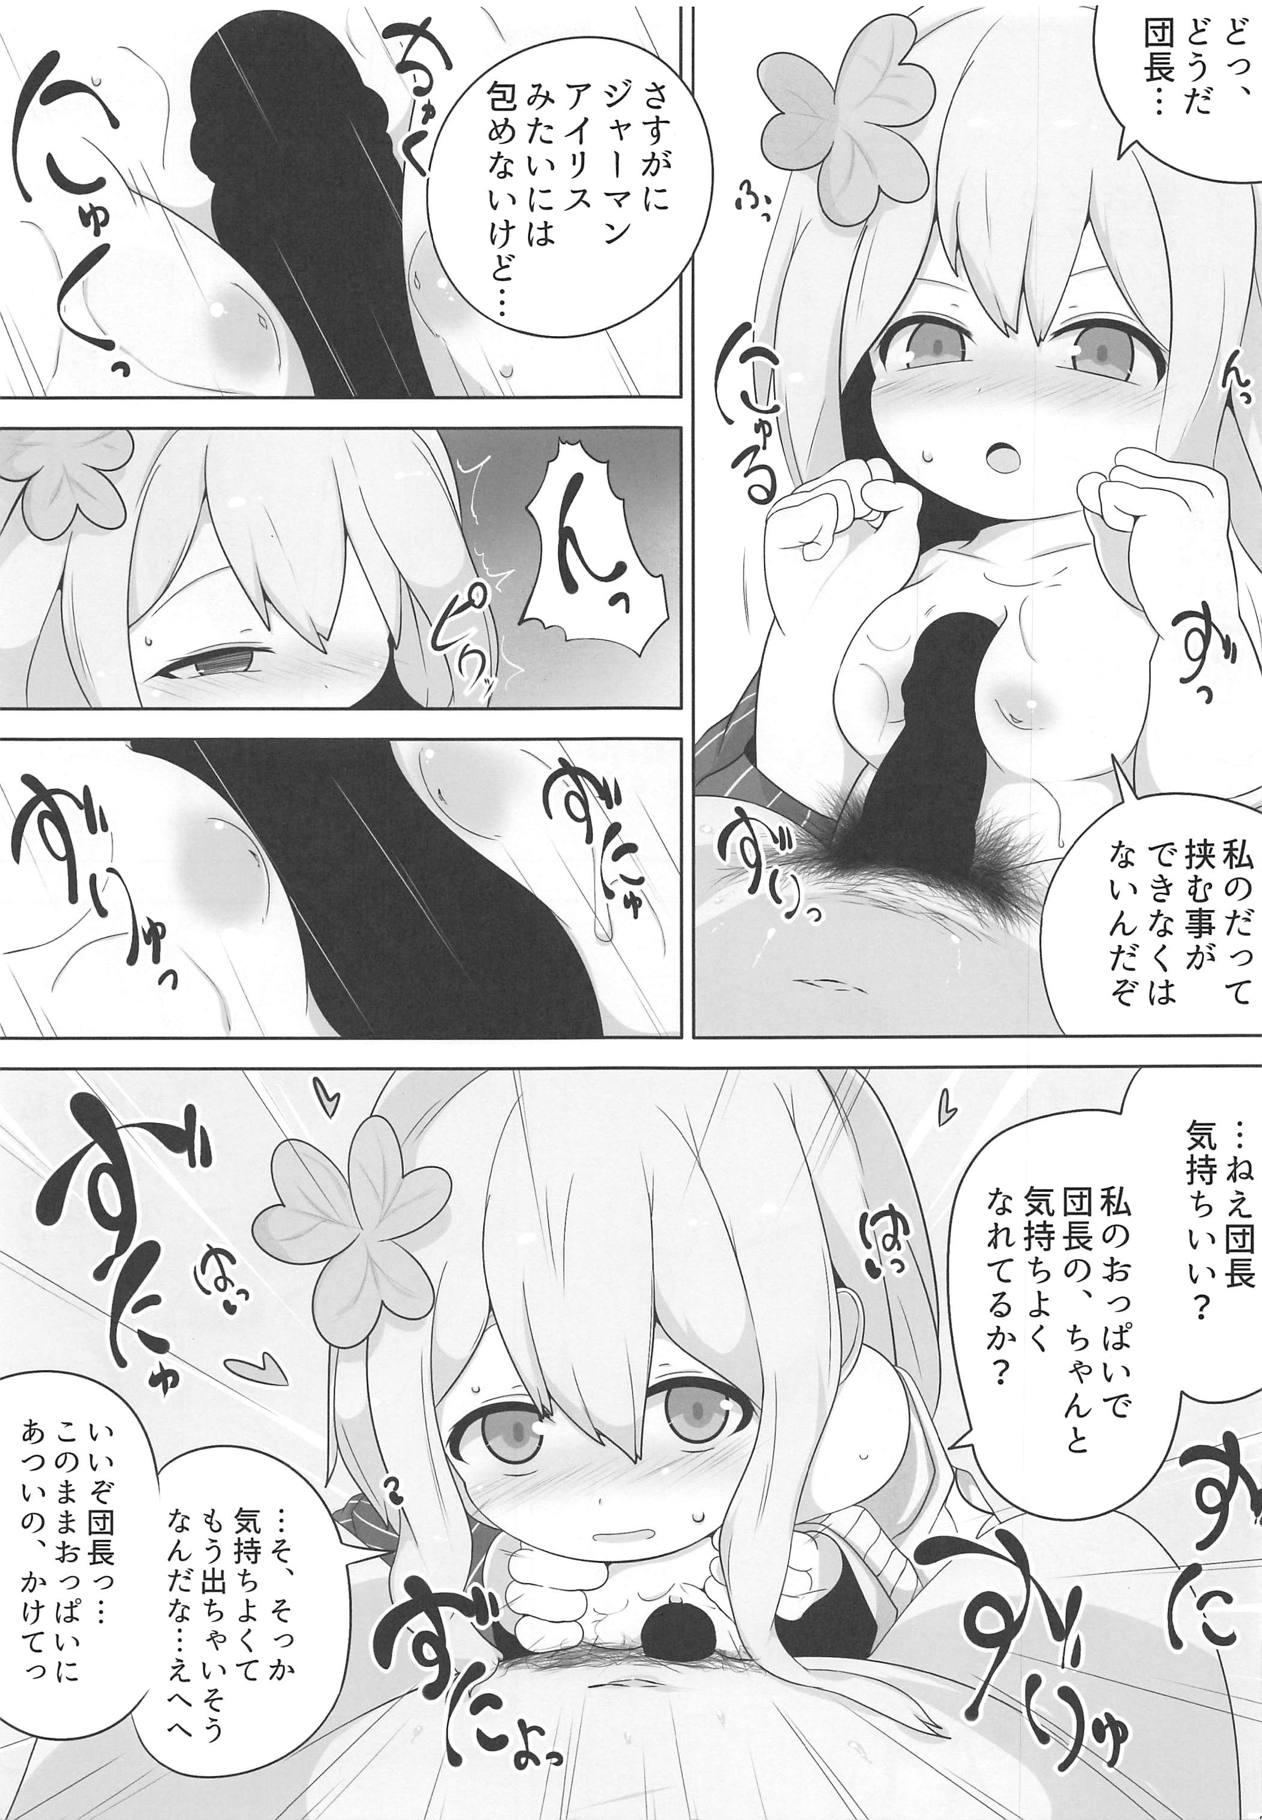 Sexy Girl Private Knights Vol. 4 - Flower knight girl Gag - Page 4